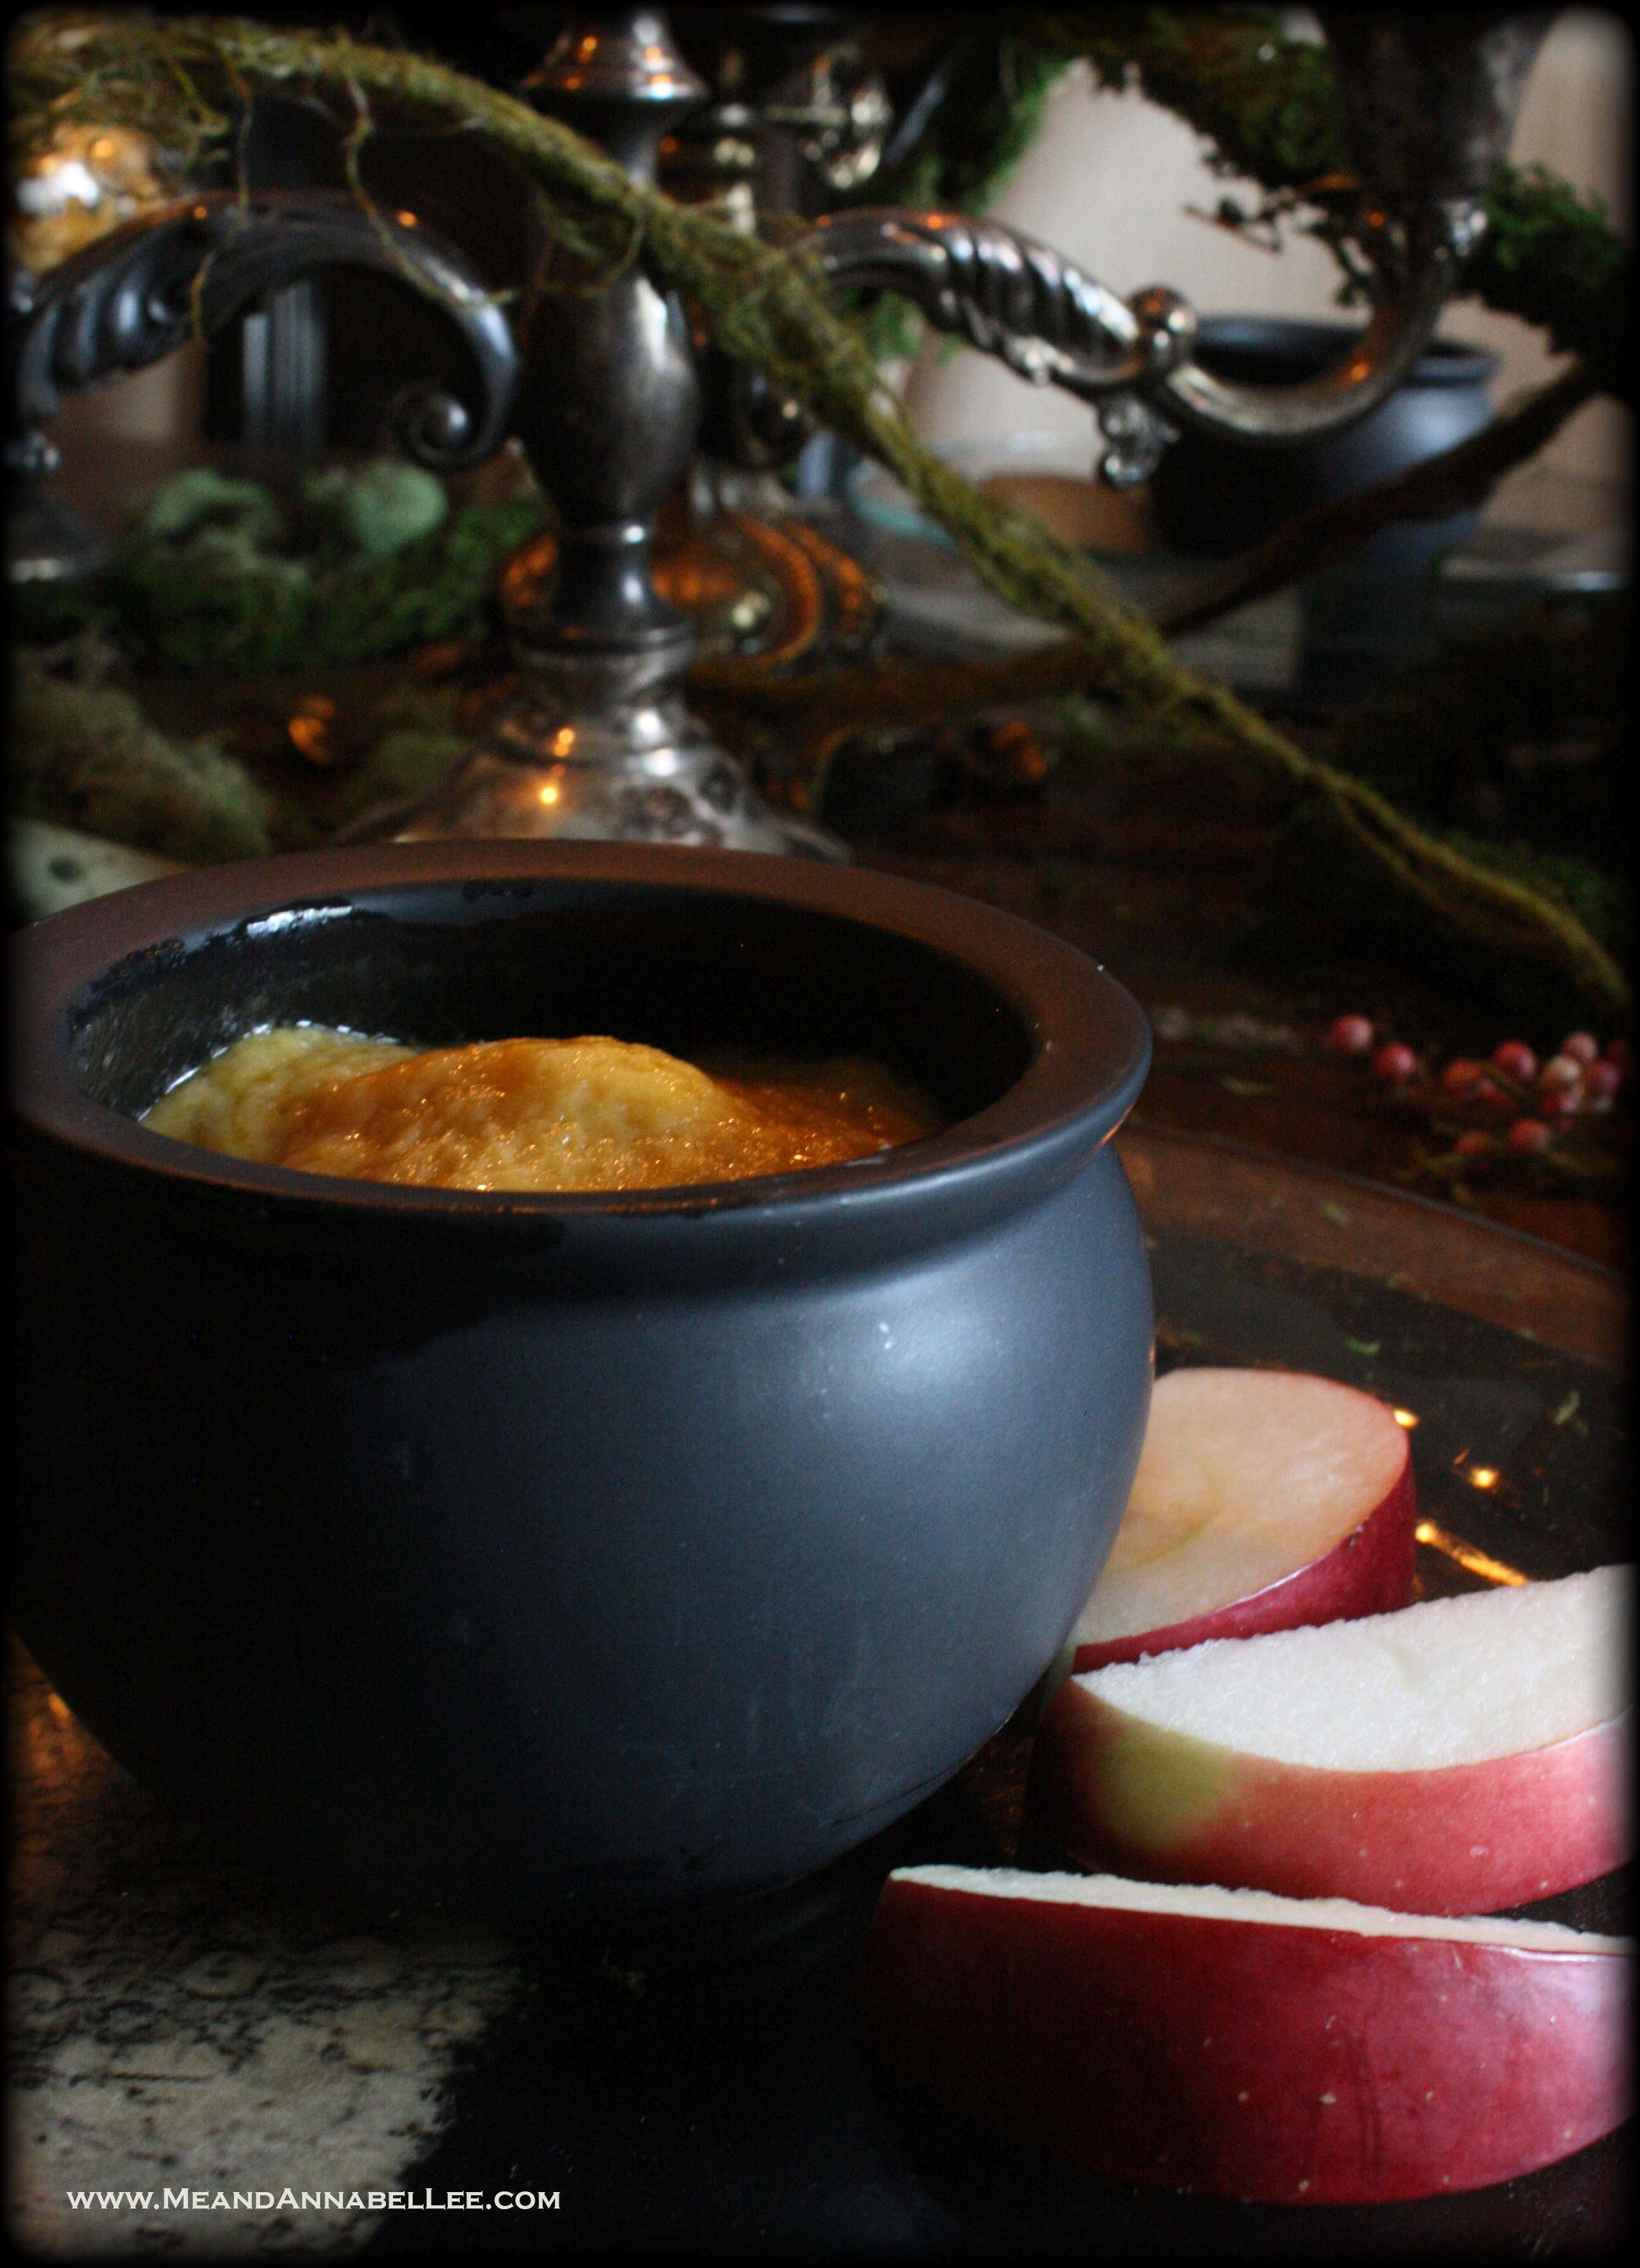 Witches Dinner Party | Pumpkin Cheese Fondue appetizer served in Ceramic Cauldrons | Fall Flavors | Samhain Feast | Halloween Food | Dinner Menu | www.MeandAnnabelLee.com